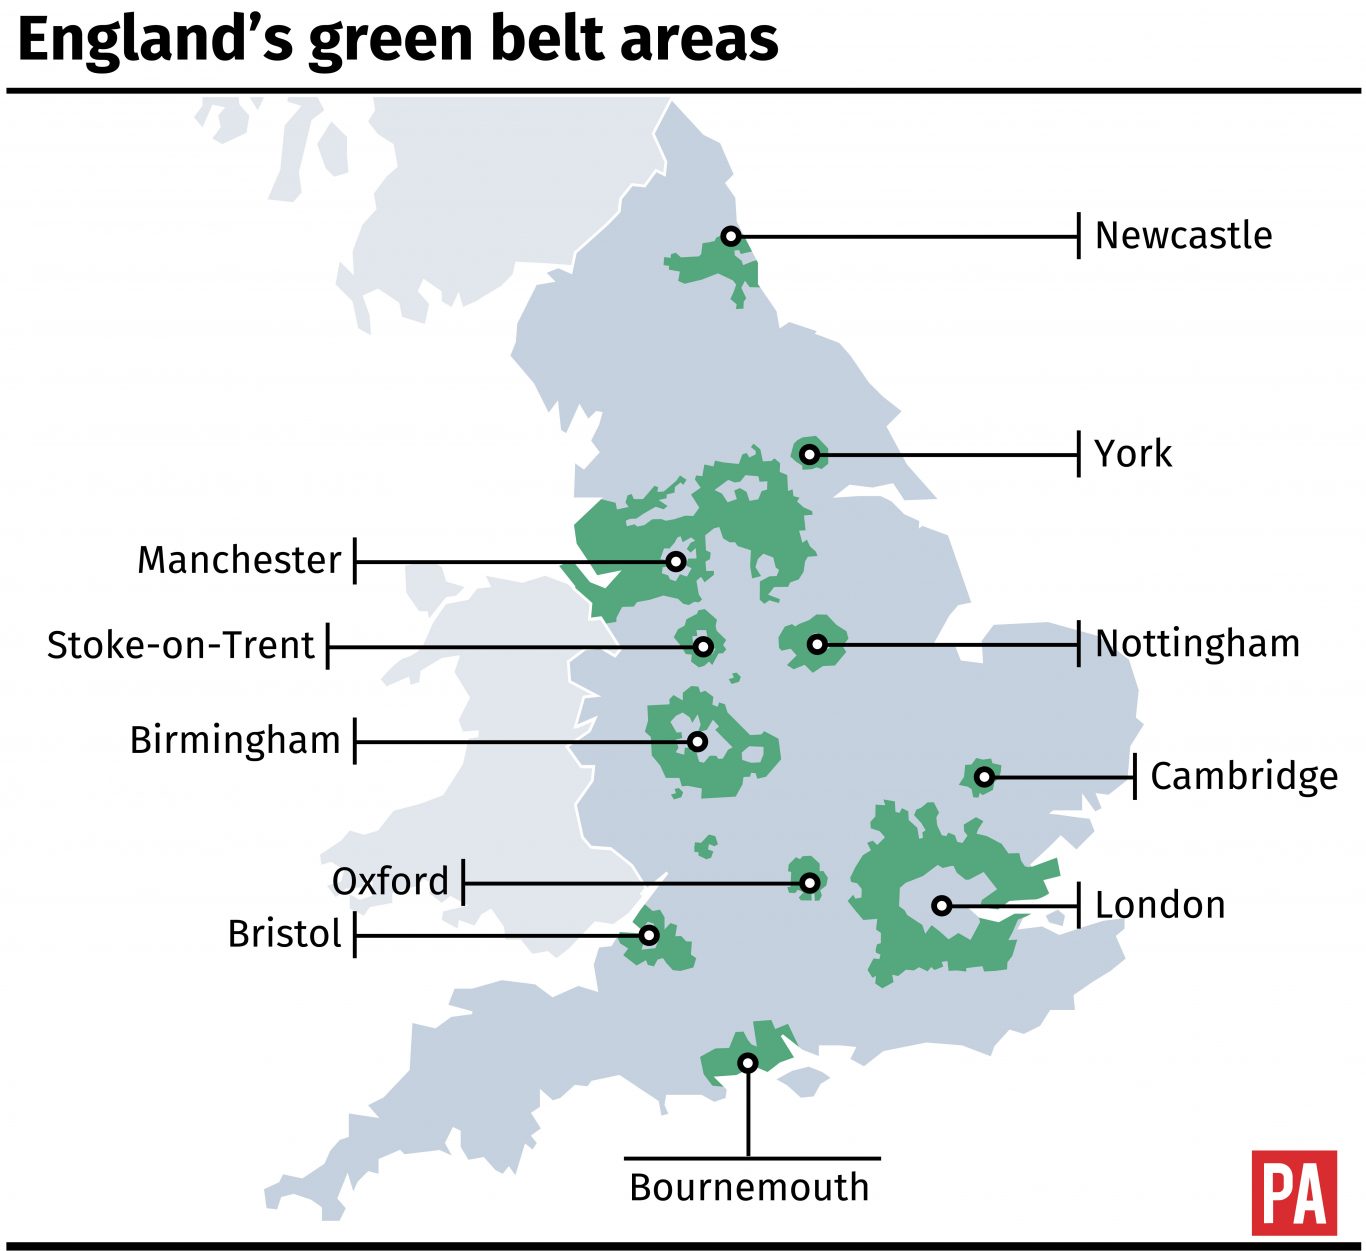 Campaigners say 70% of 425,000 Green Belt homes planned not ‘affordable